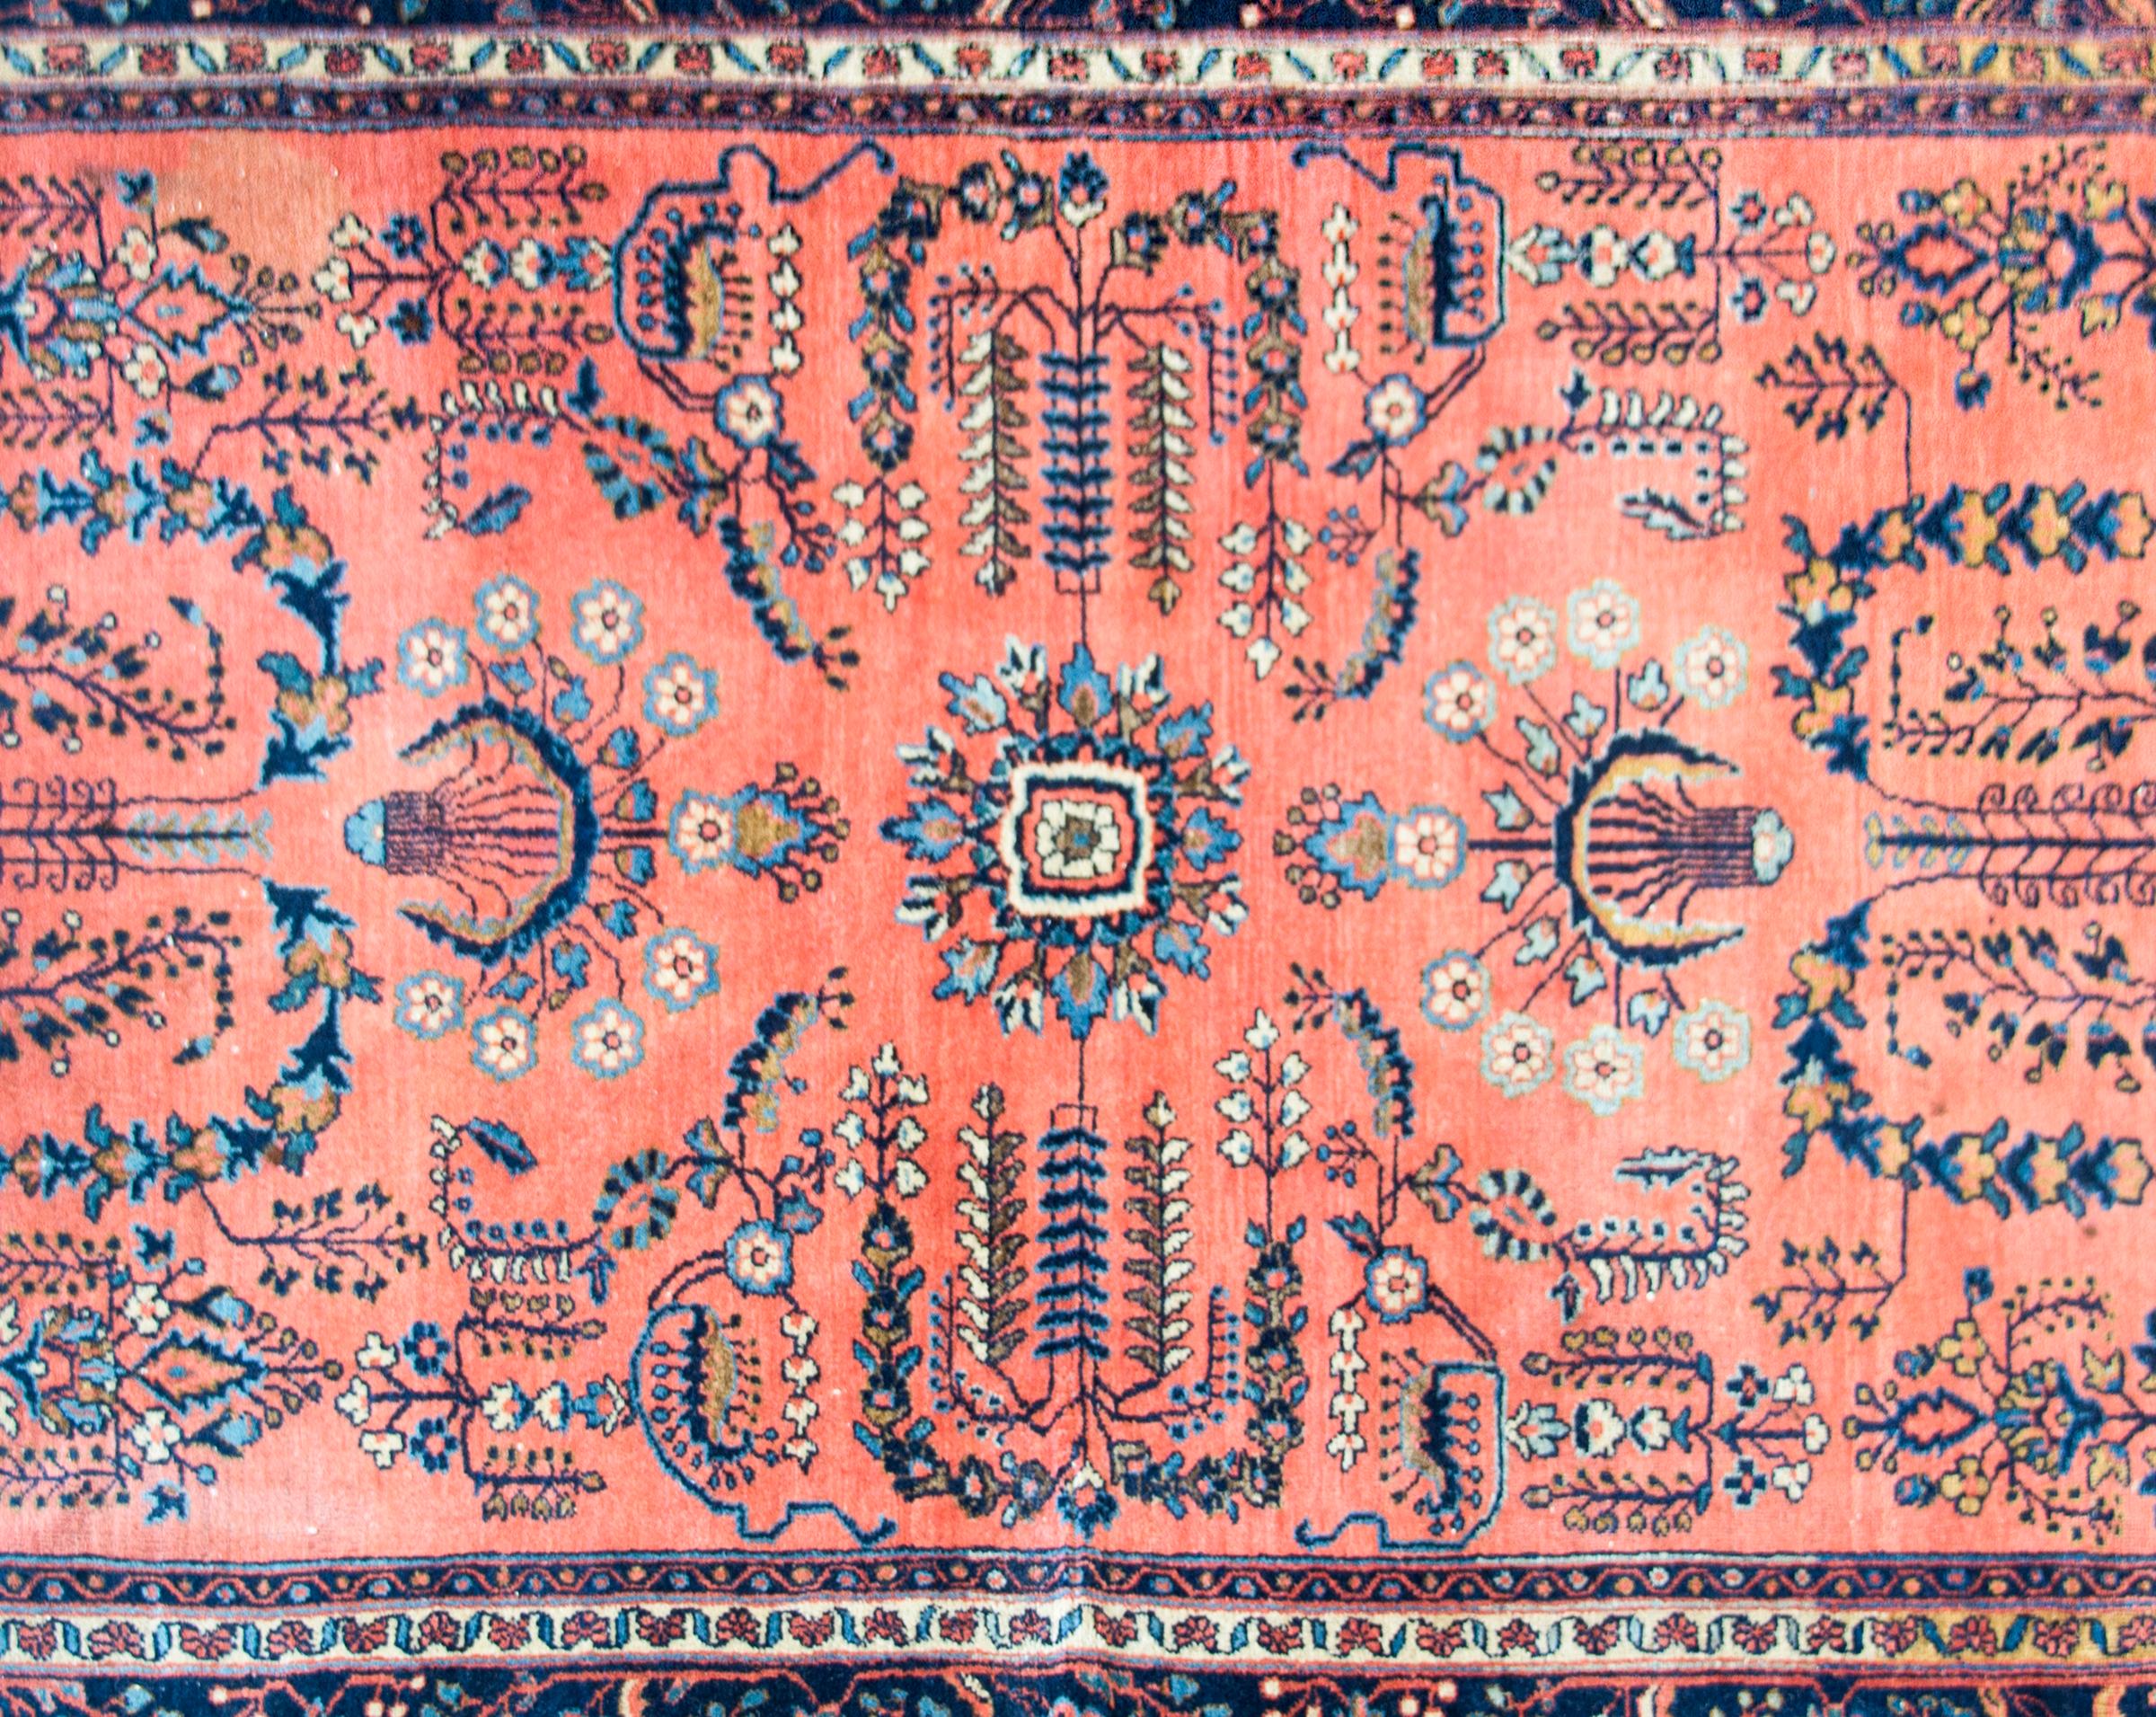 A beautiful early 20th century Persian Sarouk Mohajeran rug with a mirrored floral pattern woven in light and dark indigo, cream, and pink, set against a salmon colored background and surrounded by a wide floral and leaf patterned stripe border